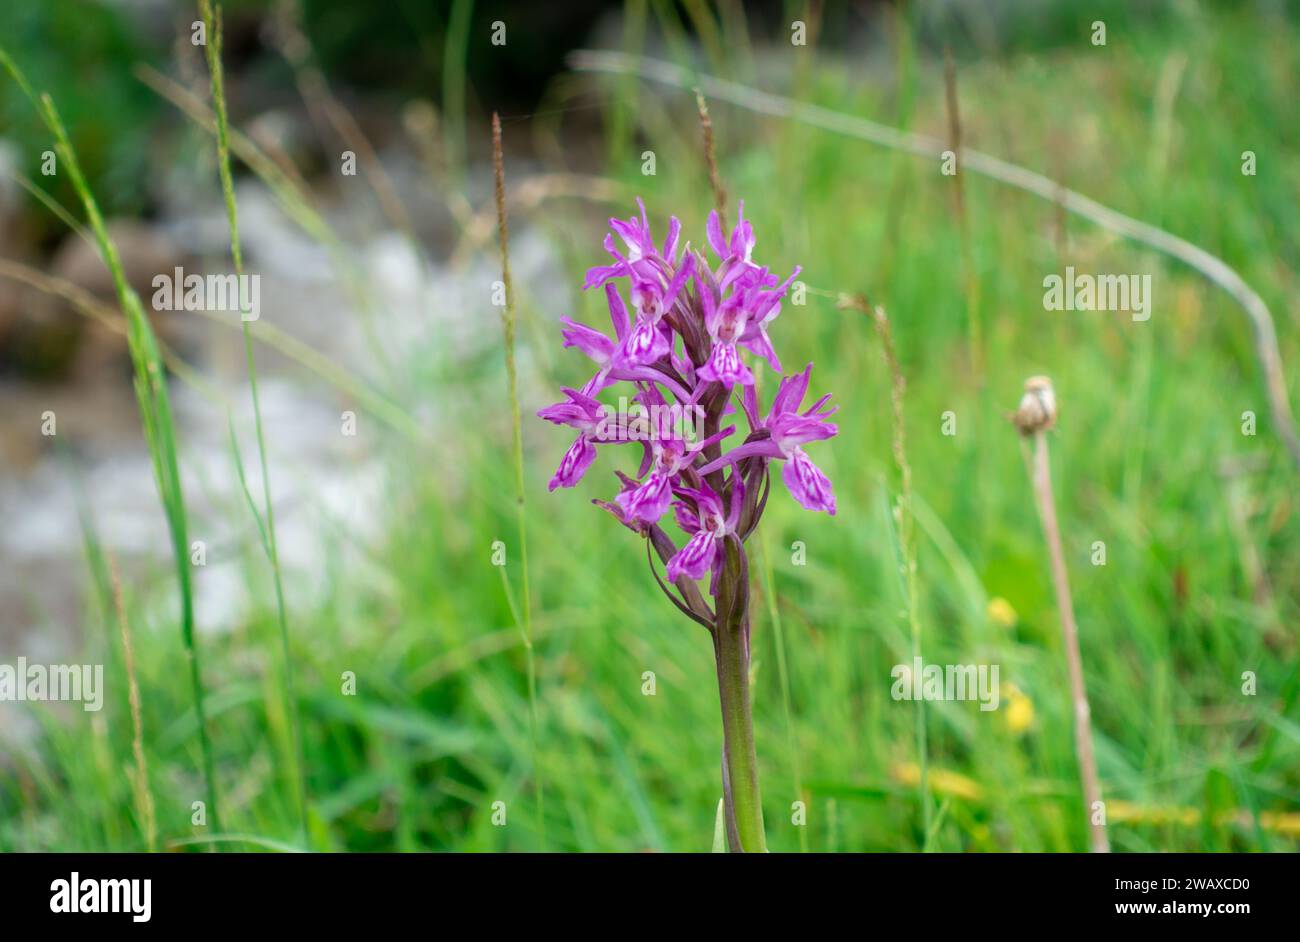 Dactylorhiza sambucina violet. Orchid. Traunsteiner's fingerroot. A species of herbaceous plants from the genus Palmaceae of the Orchidaceae family Stock Photo